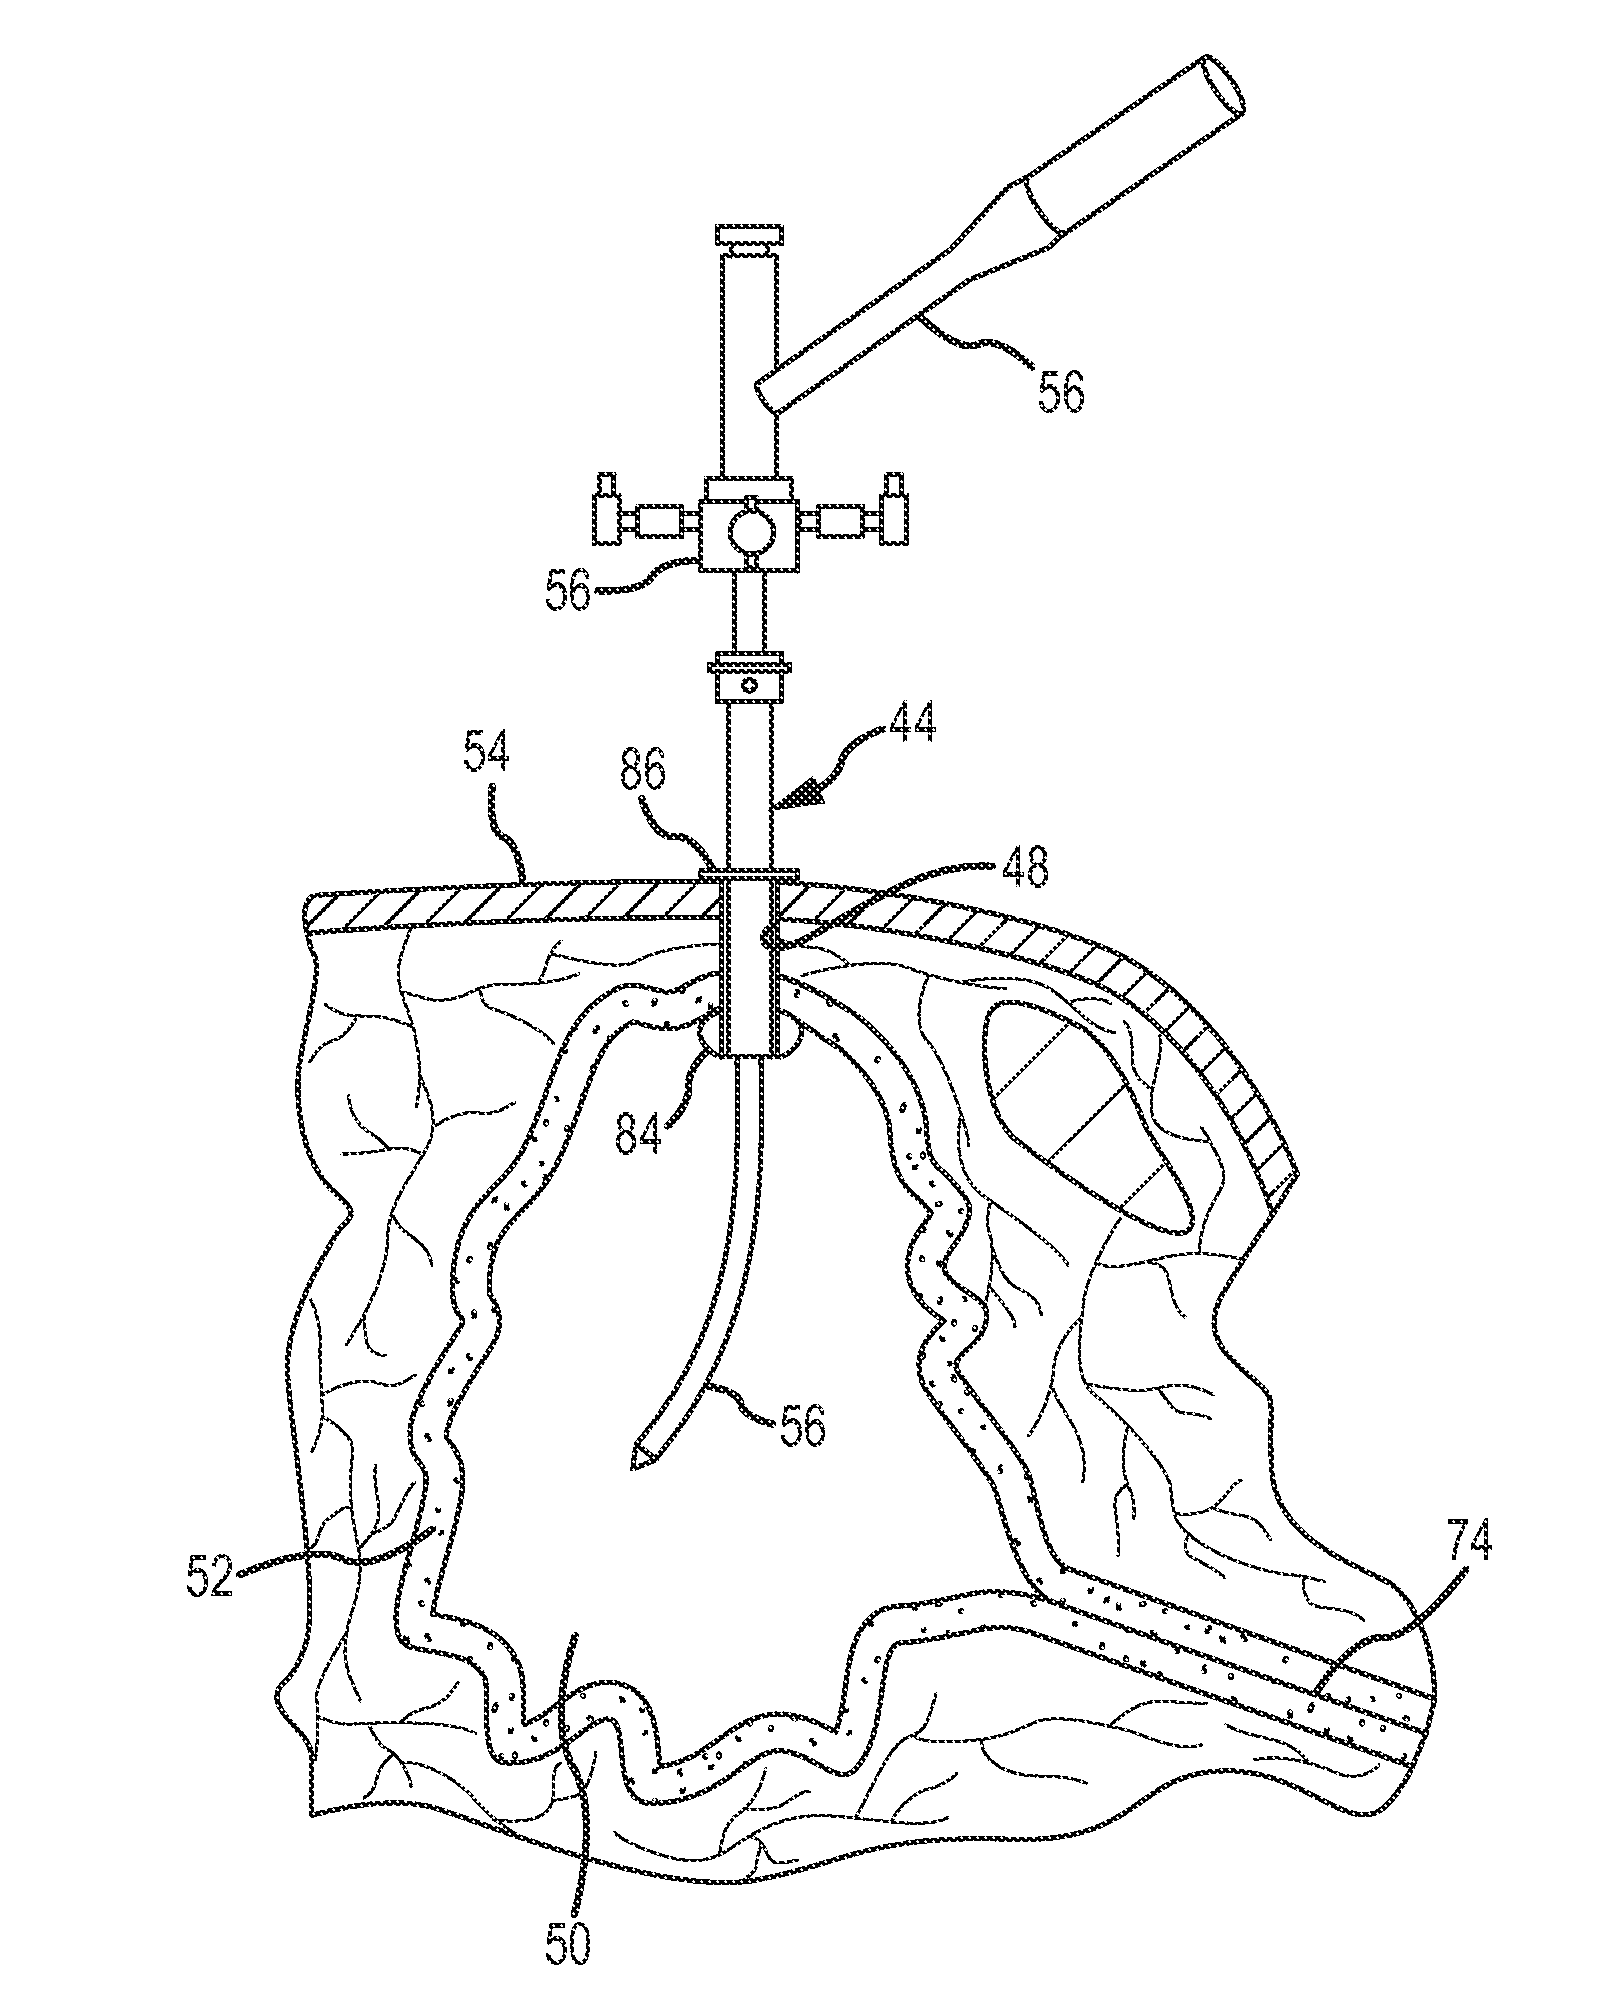 Method and Apparatus for Placing a Cannula in a Bladder